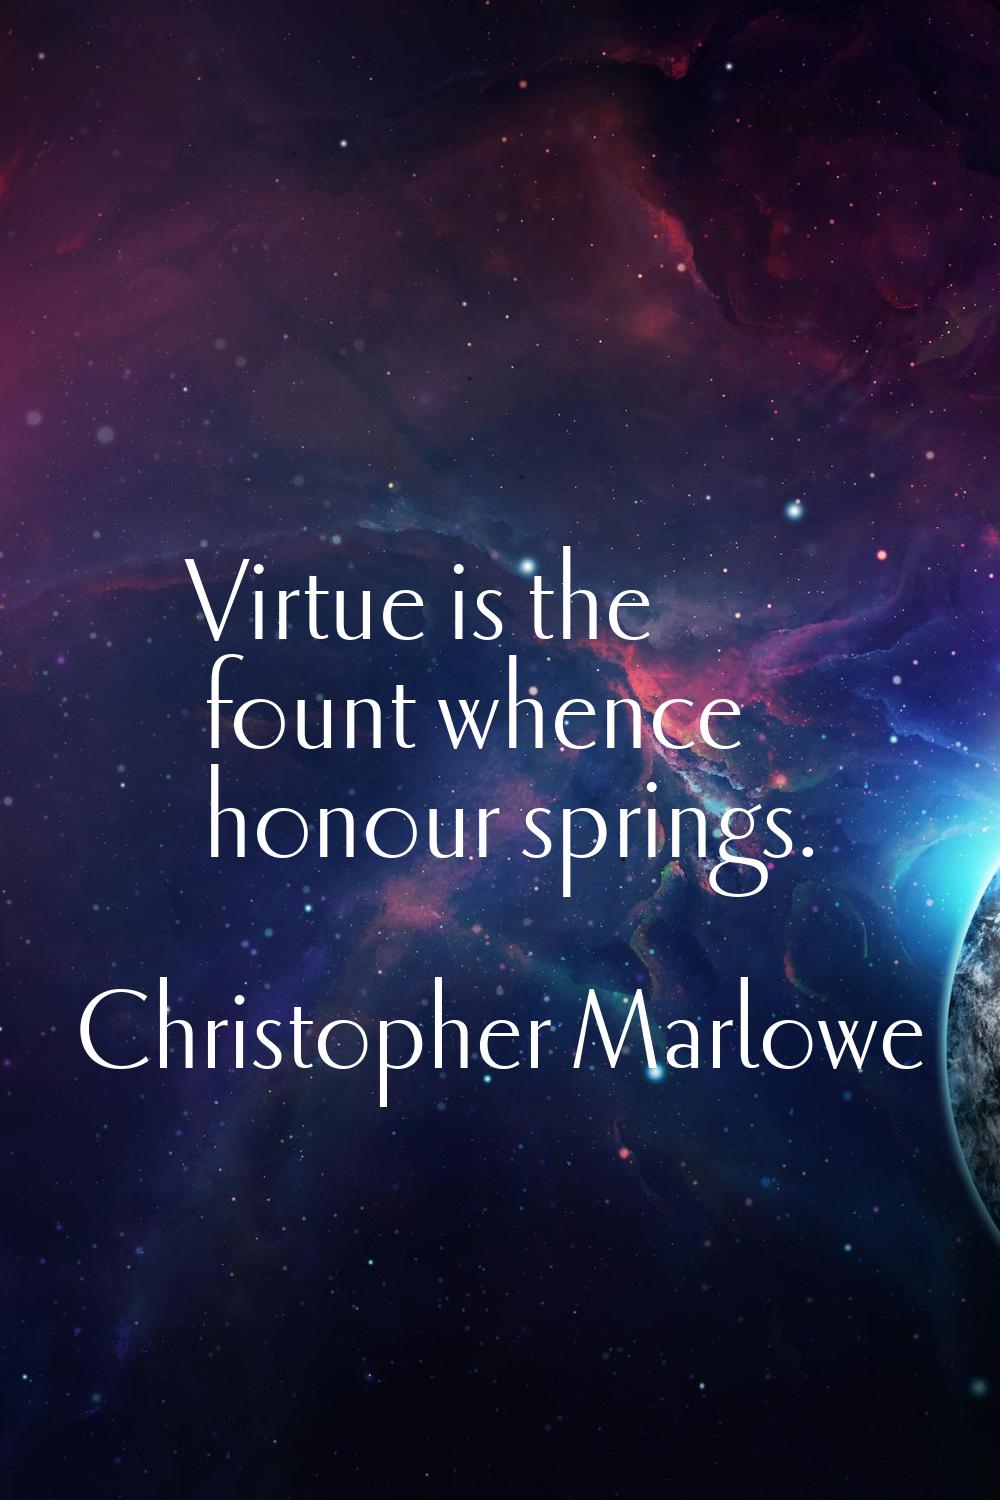 Virtue is the fount whence honour springs.